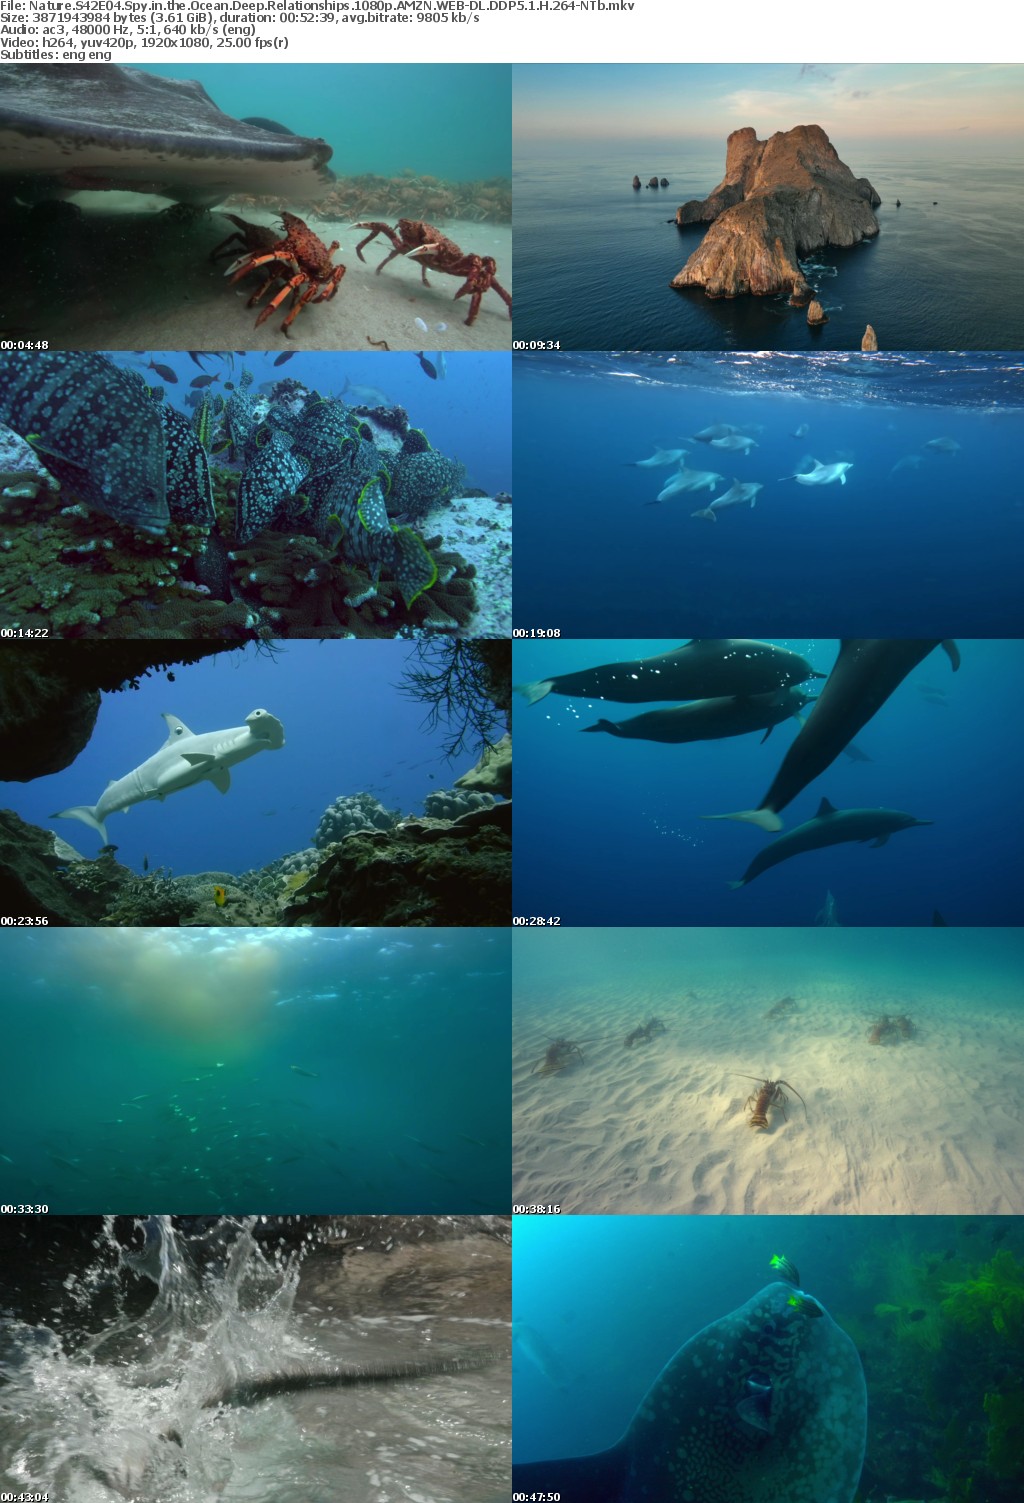 Nature S42E04 Spy in the Ocean Deep Relationships 1080p AMZN WEB-DL DDP5 1 H 264-NTb